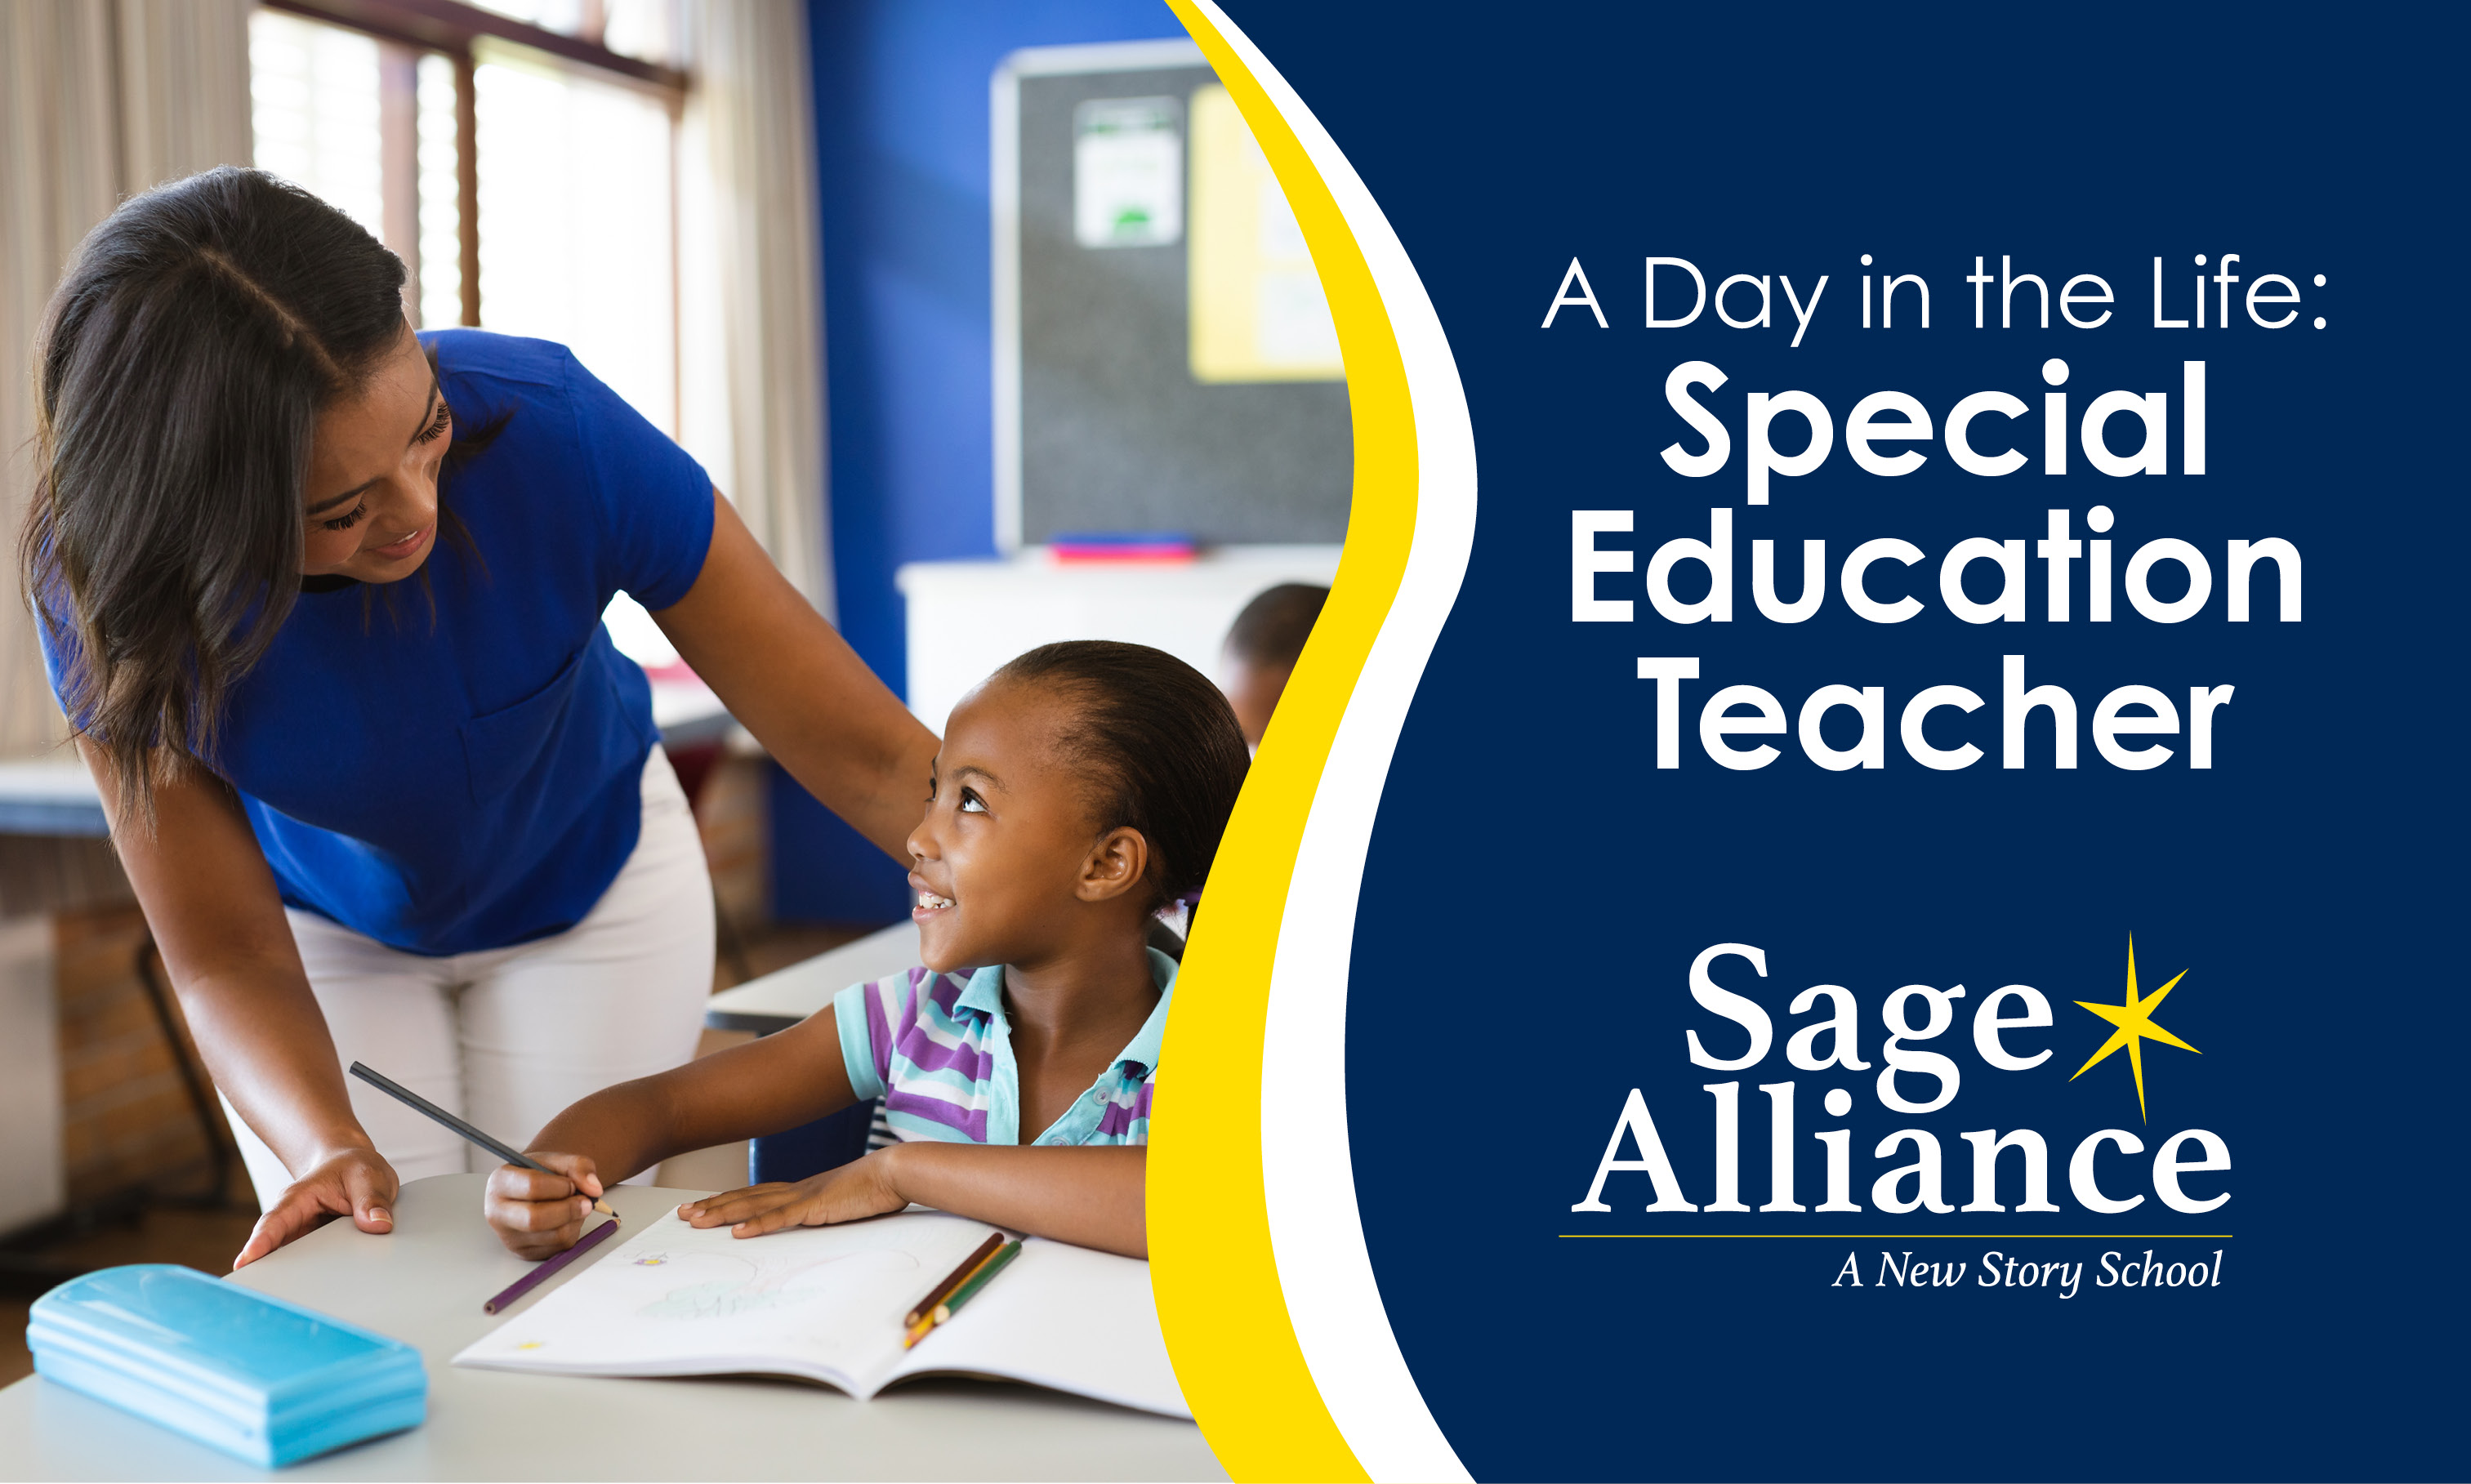 A Day in the Life: Special Education Teacher